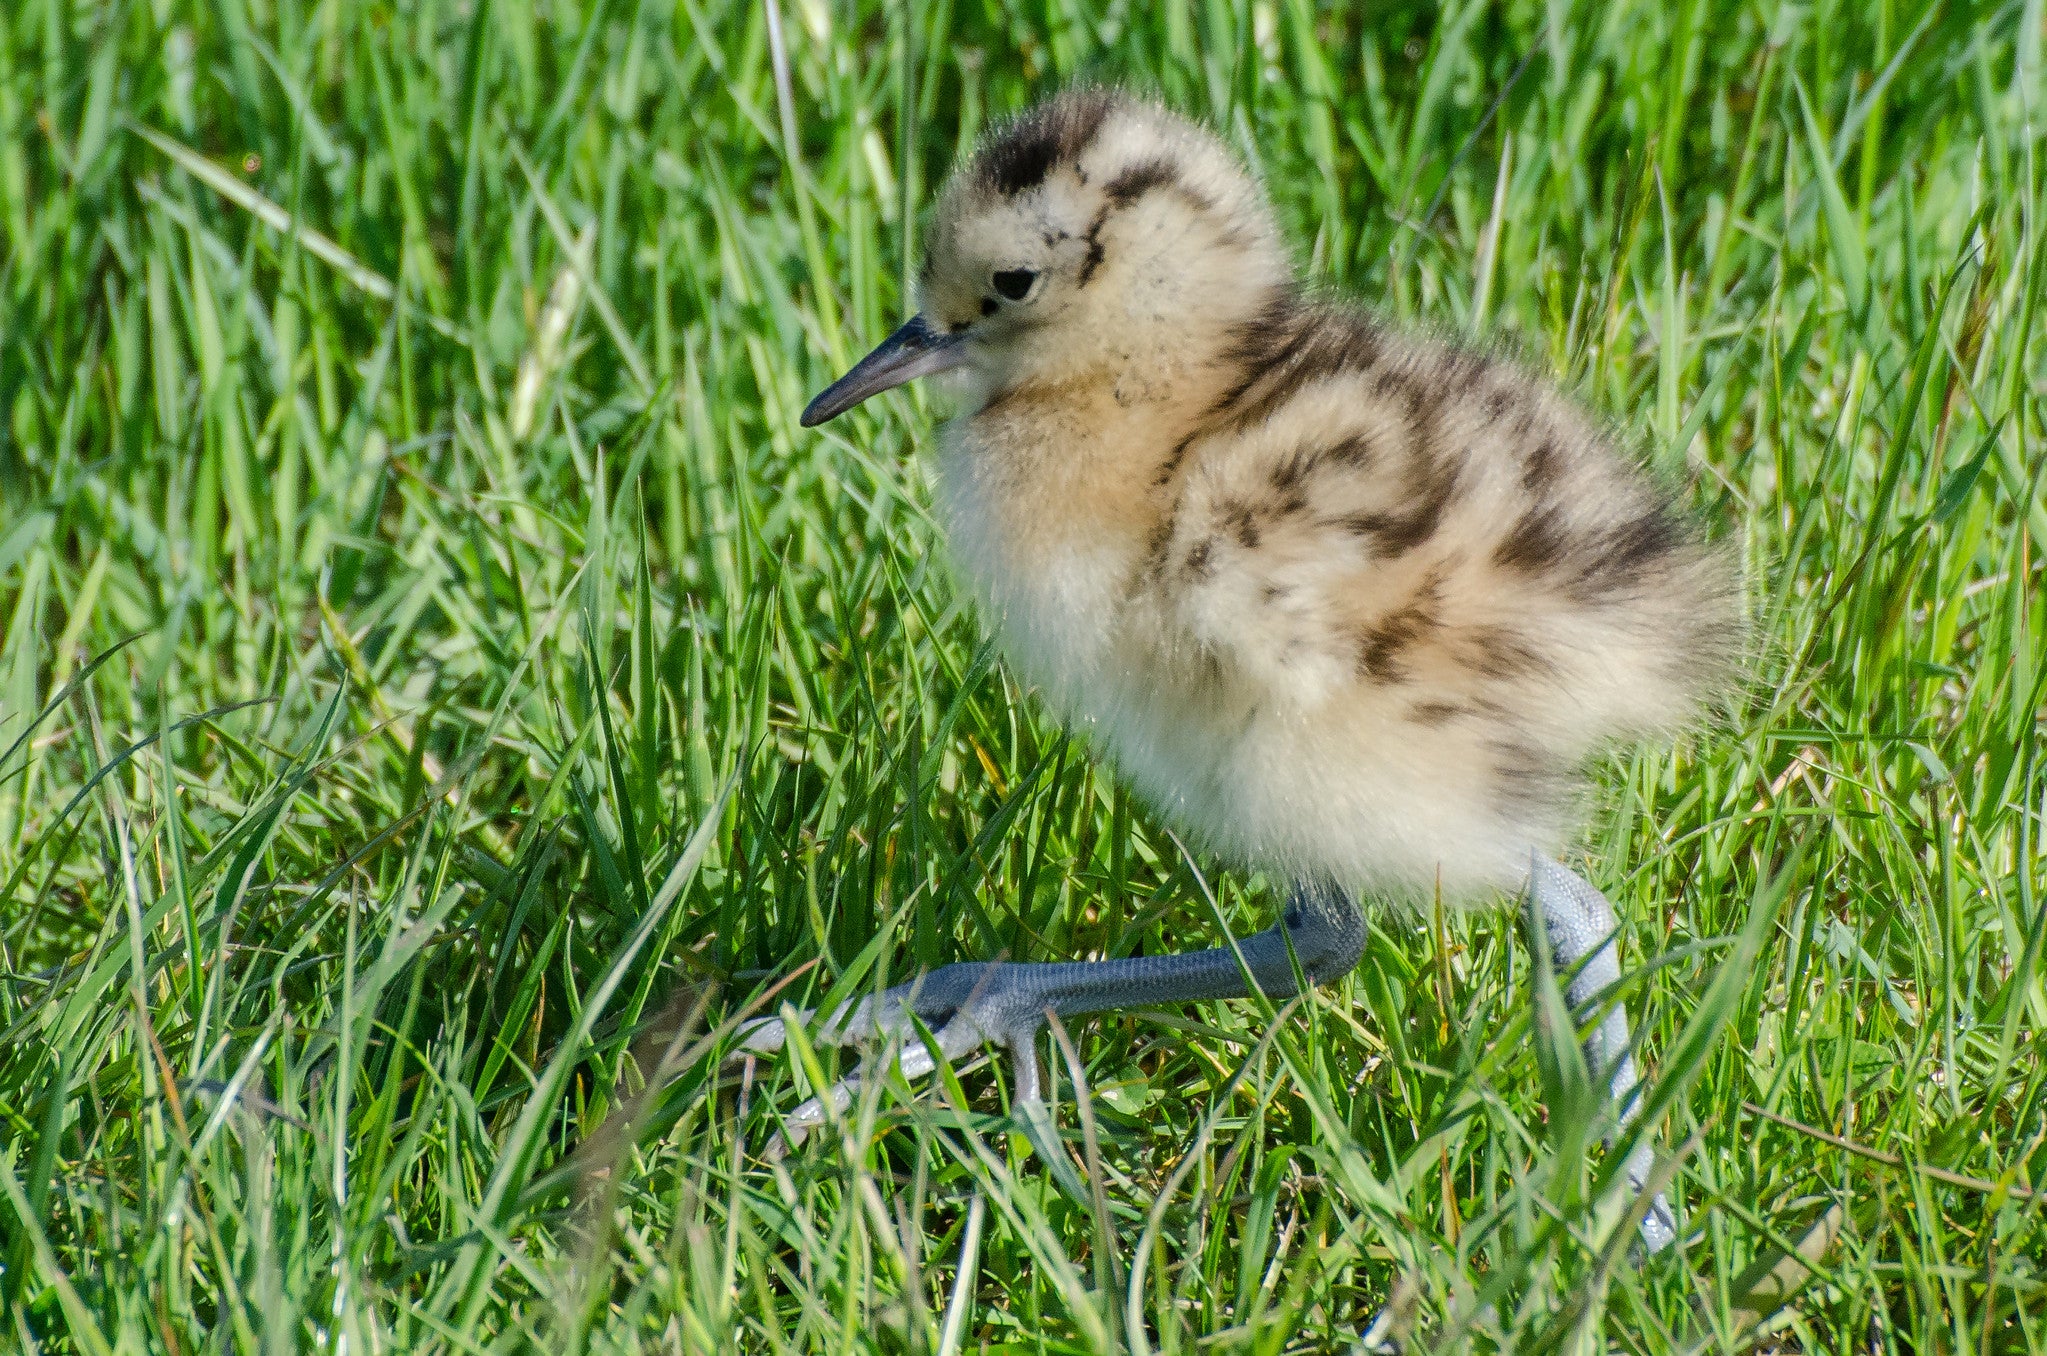 an adorably fluffy curlew chick with buffy tan down and dark brown leopard spots runs through the grass. The chick's blue-gray legs look huge in proportion to its body. Its bill is still short, so it doesn't look much like its curlew parents yet!